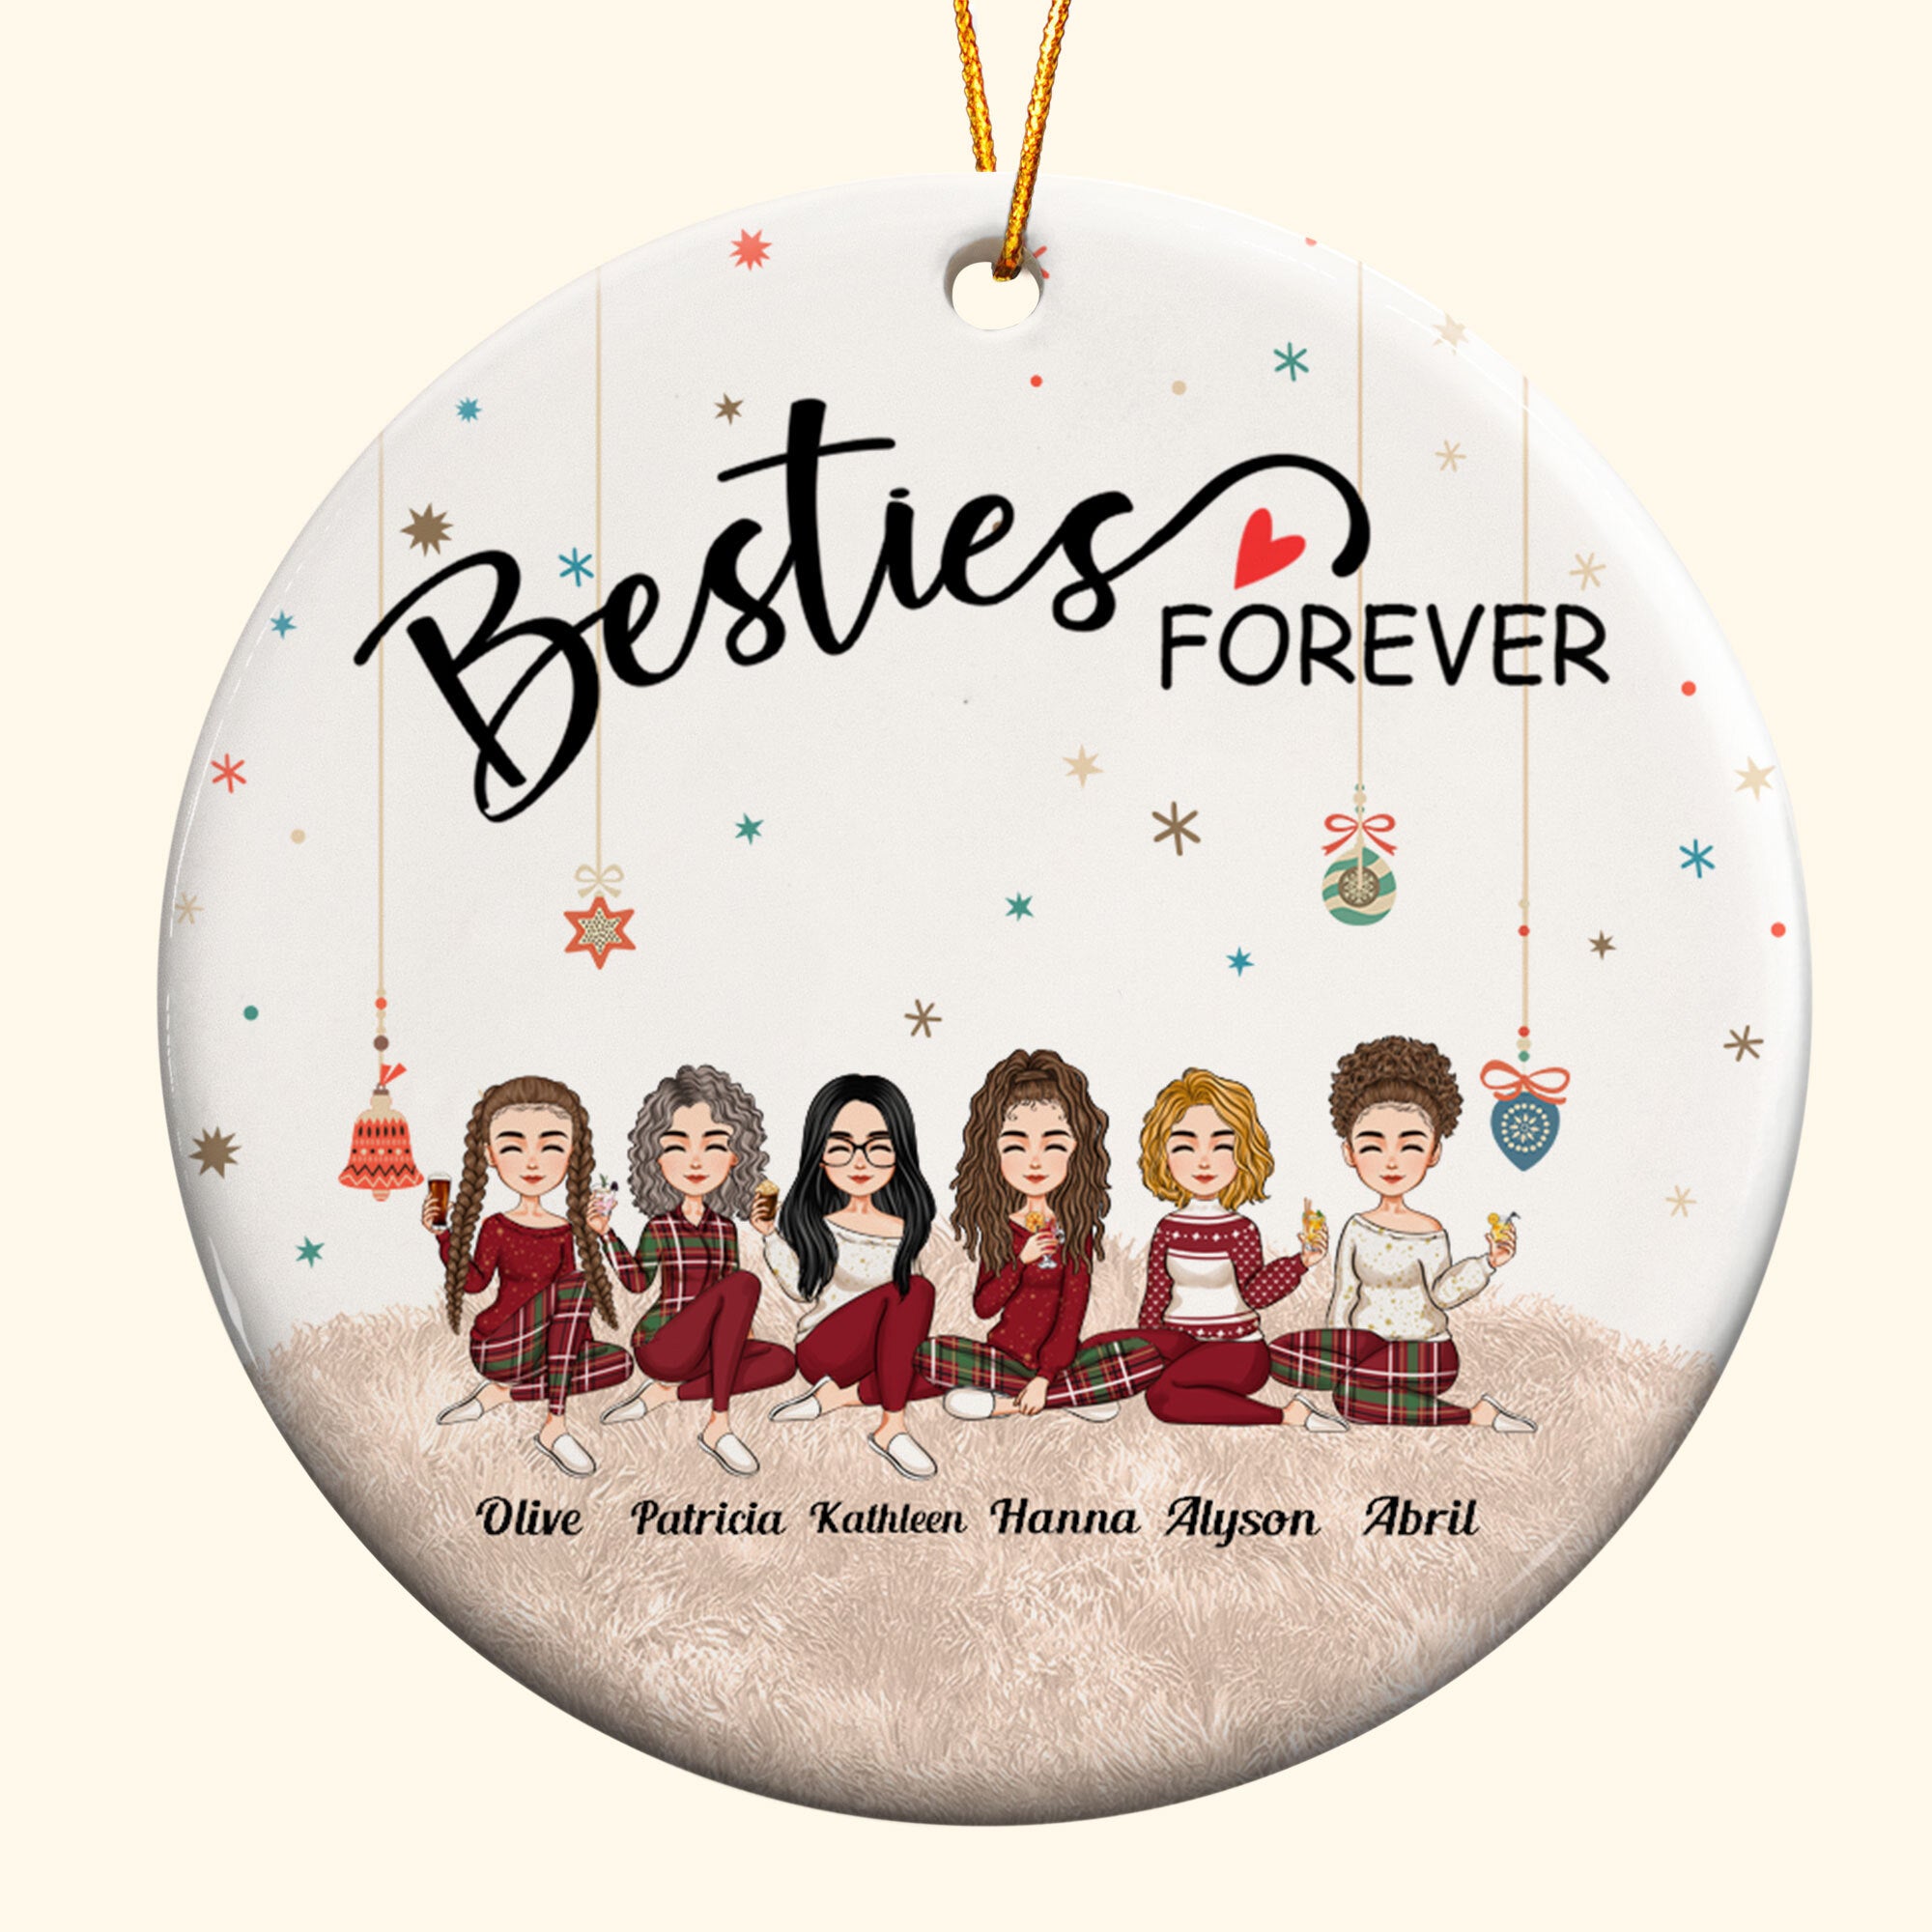 Besties Forever - Personalized Ceramic Ornament - Christmas, New Year Gift For Sistas, Sister, Besties, Best Friends, Soul Sisters  FOREVER . Olive Patricia Kathteen Hanna Alyson Abril 